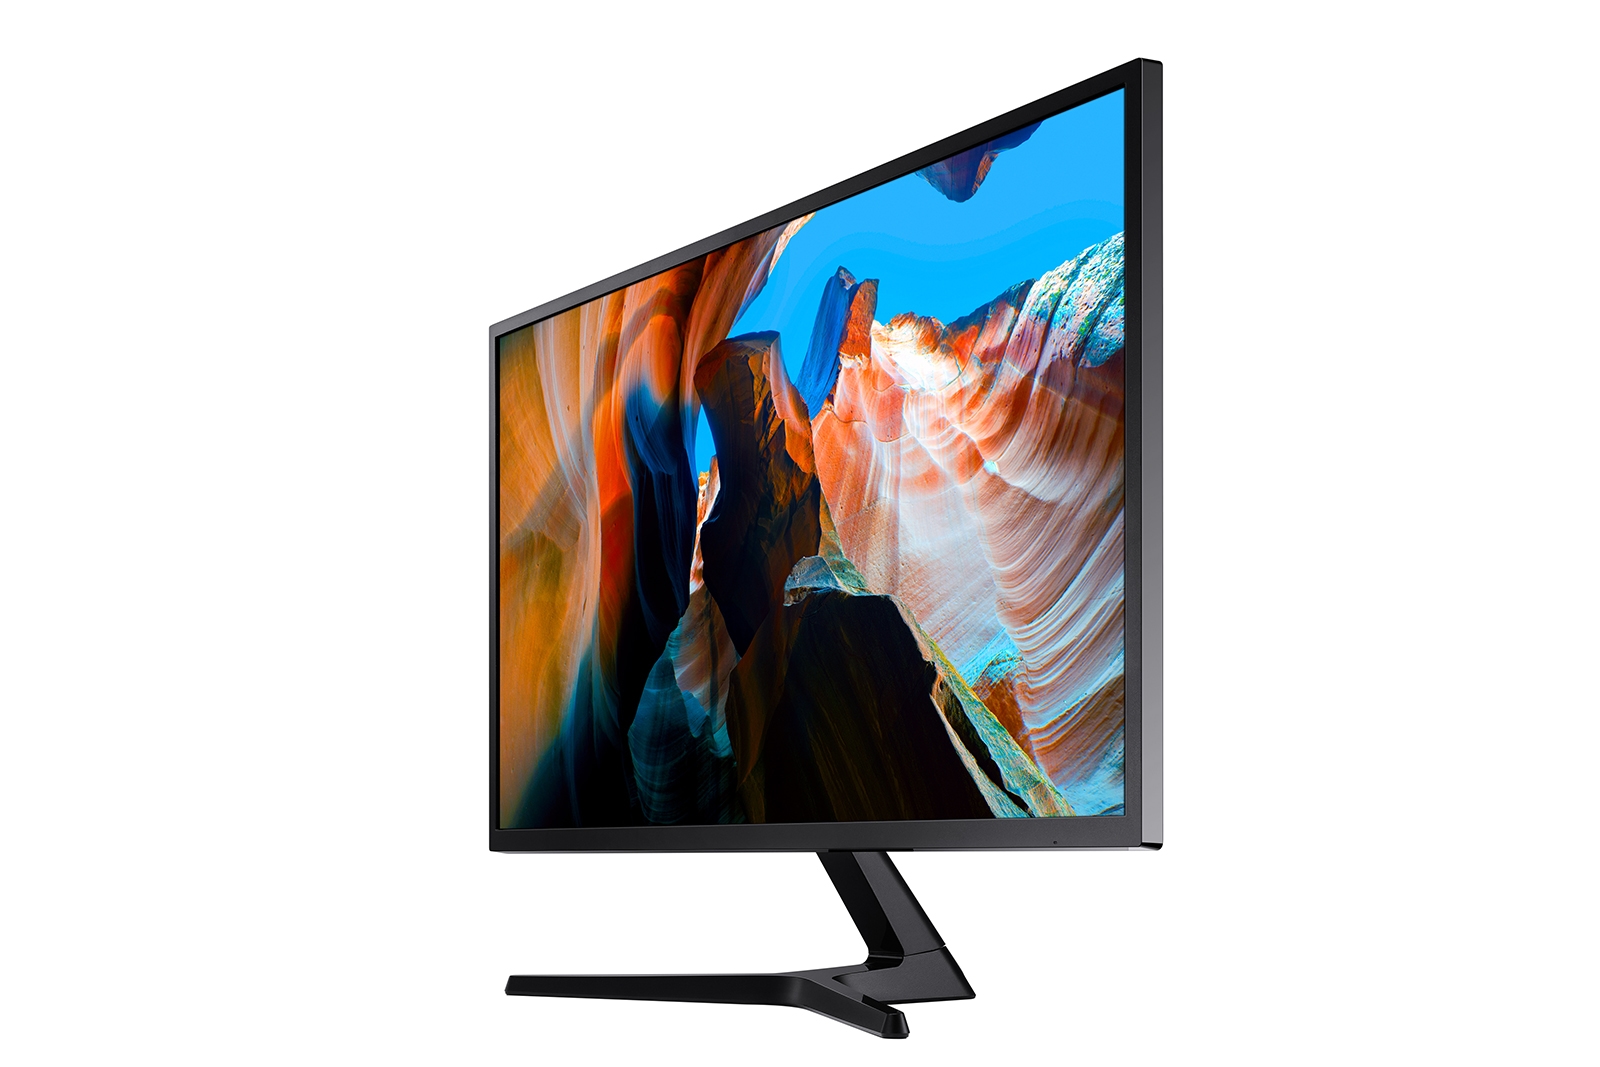 video card for 4k tv as monitor